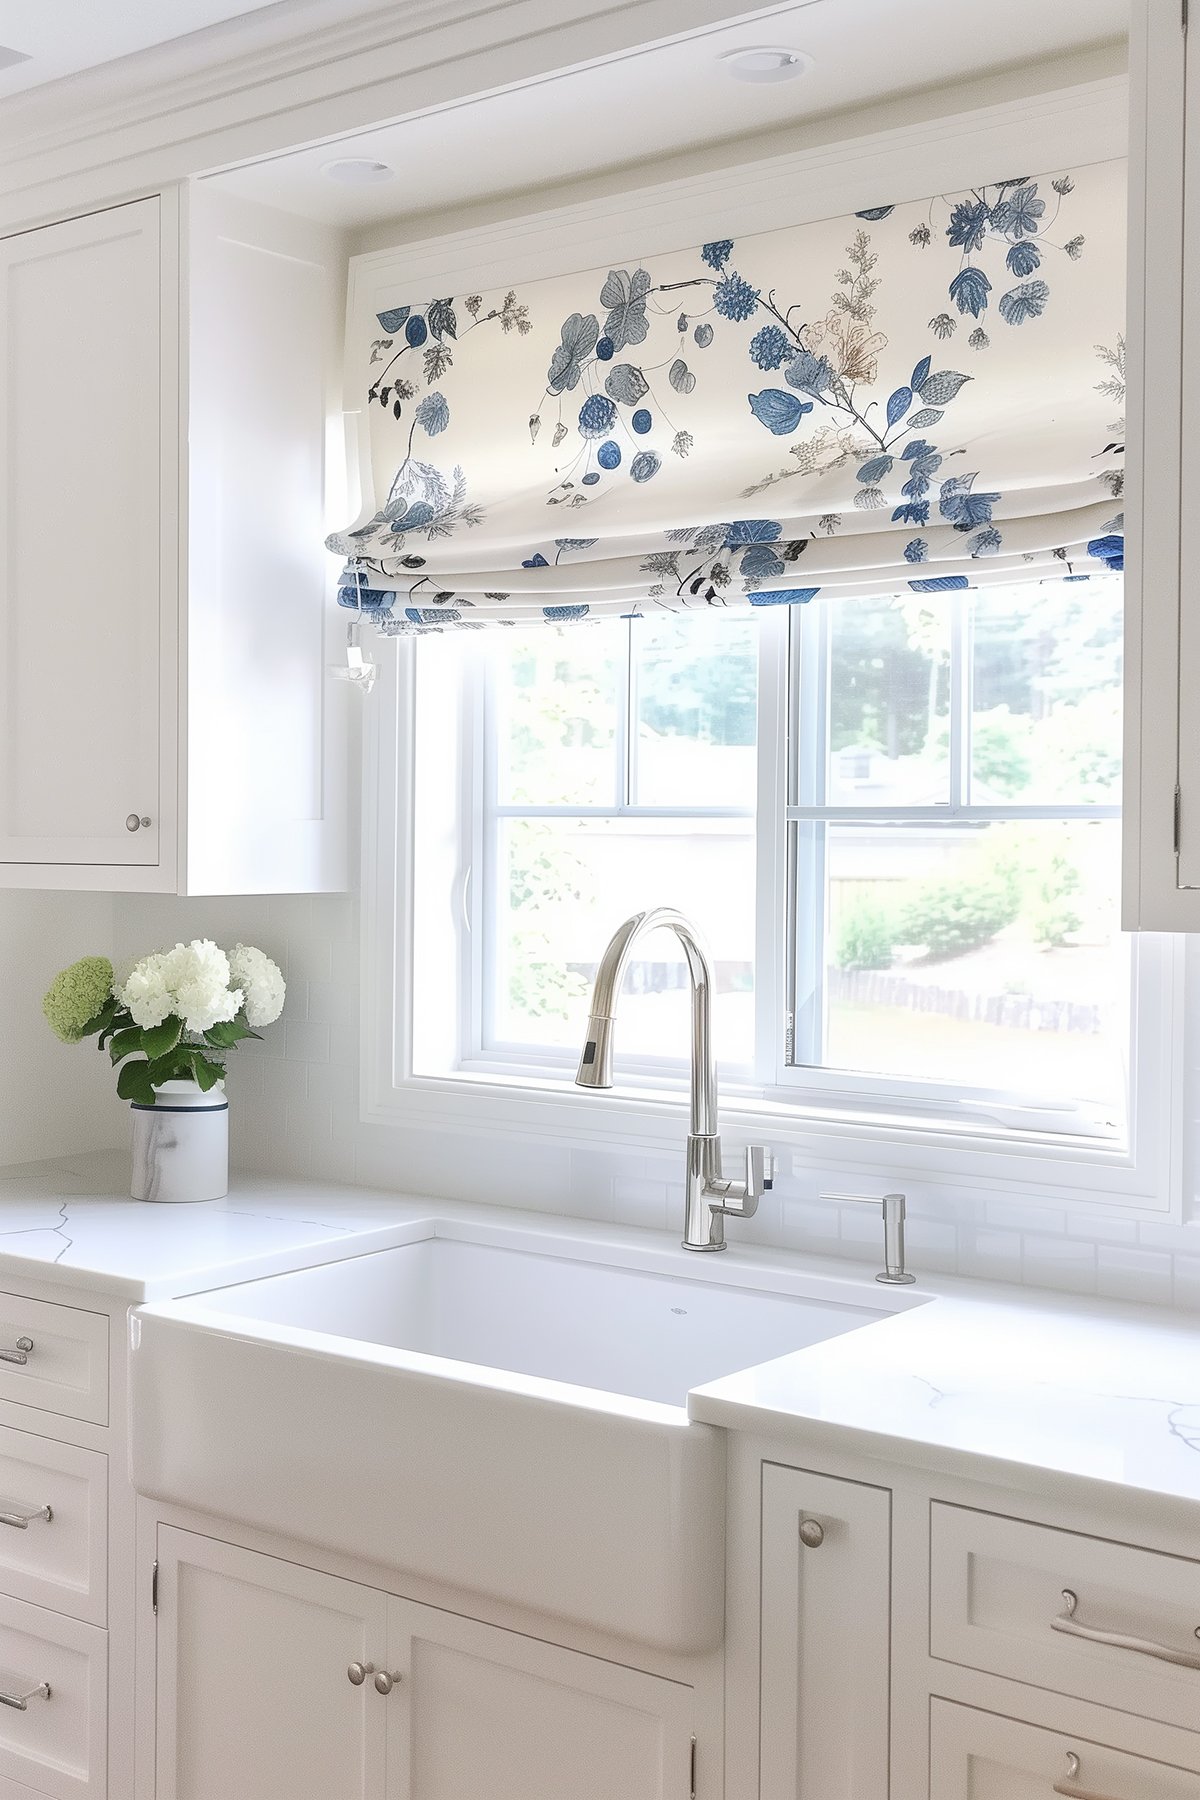 white kitchen with a blue floral print shade over the sink.